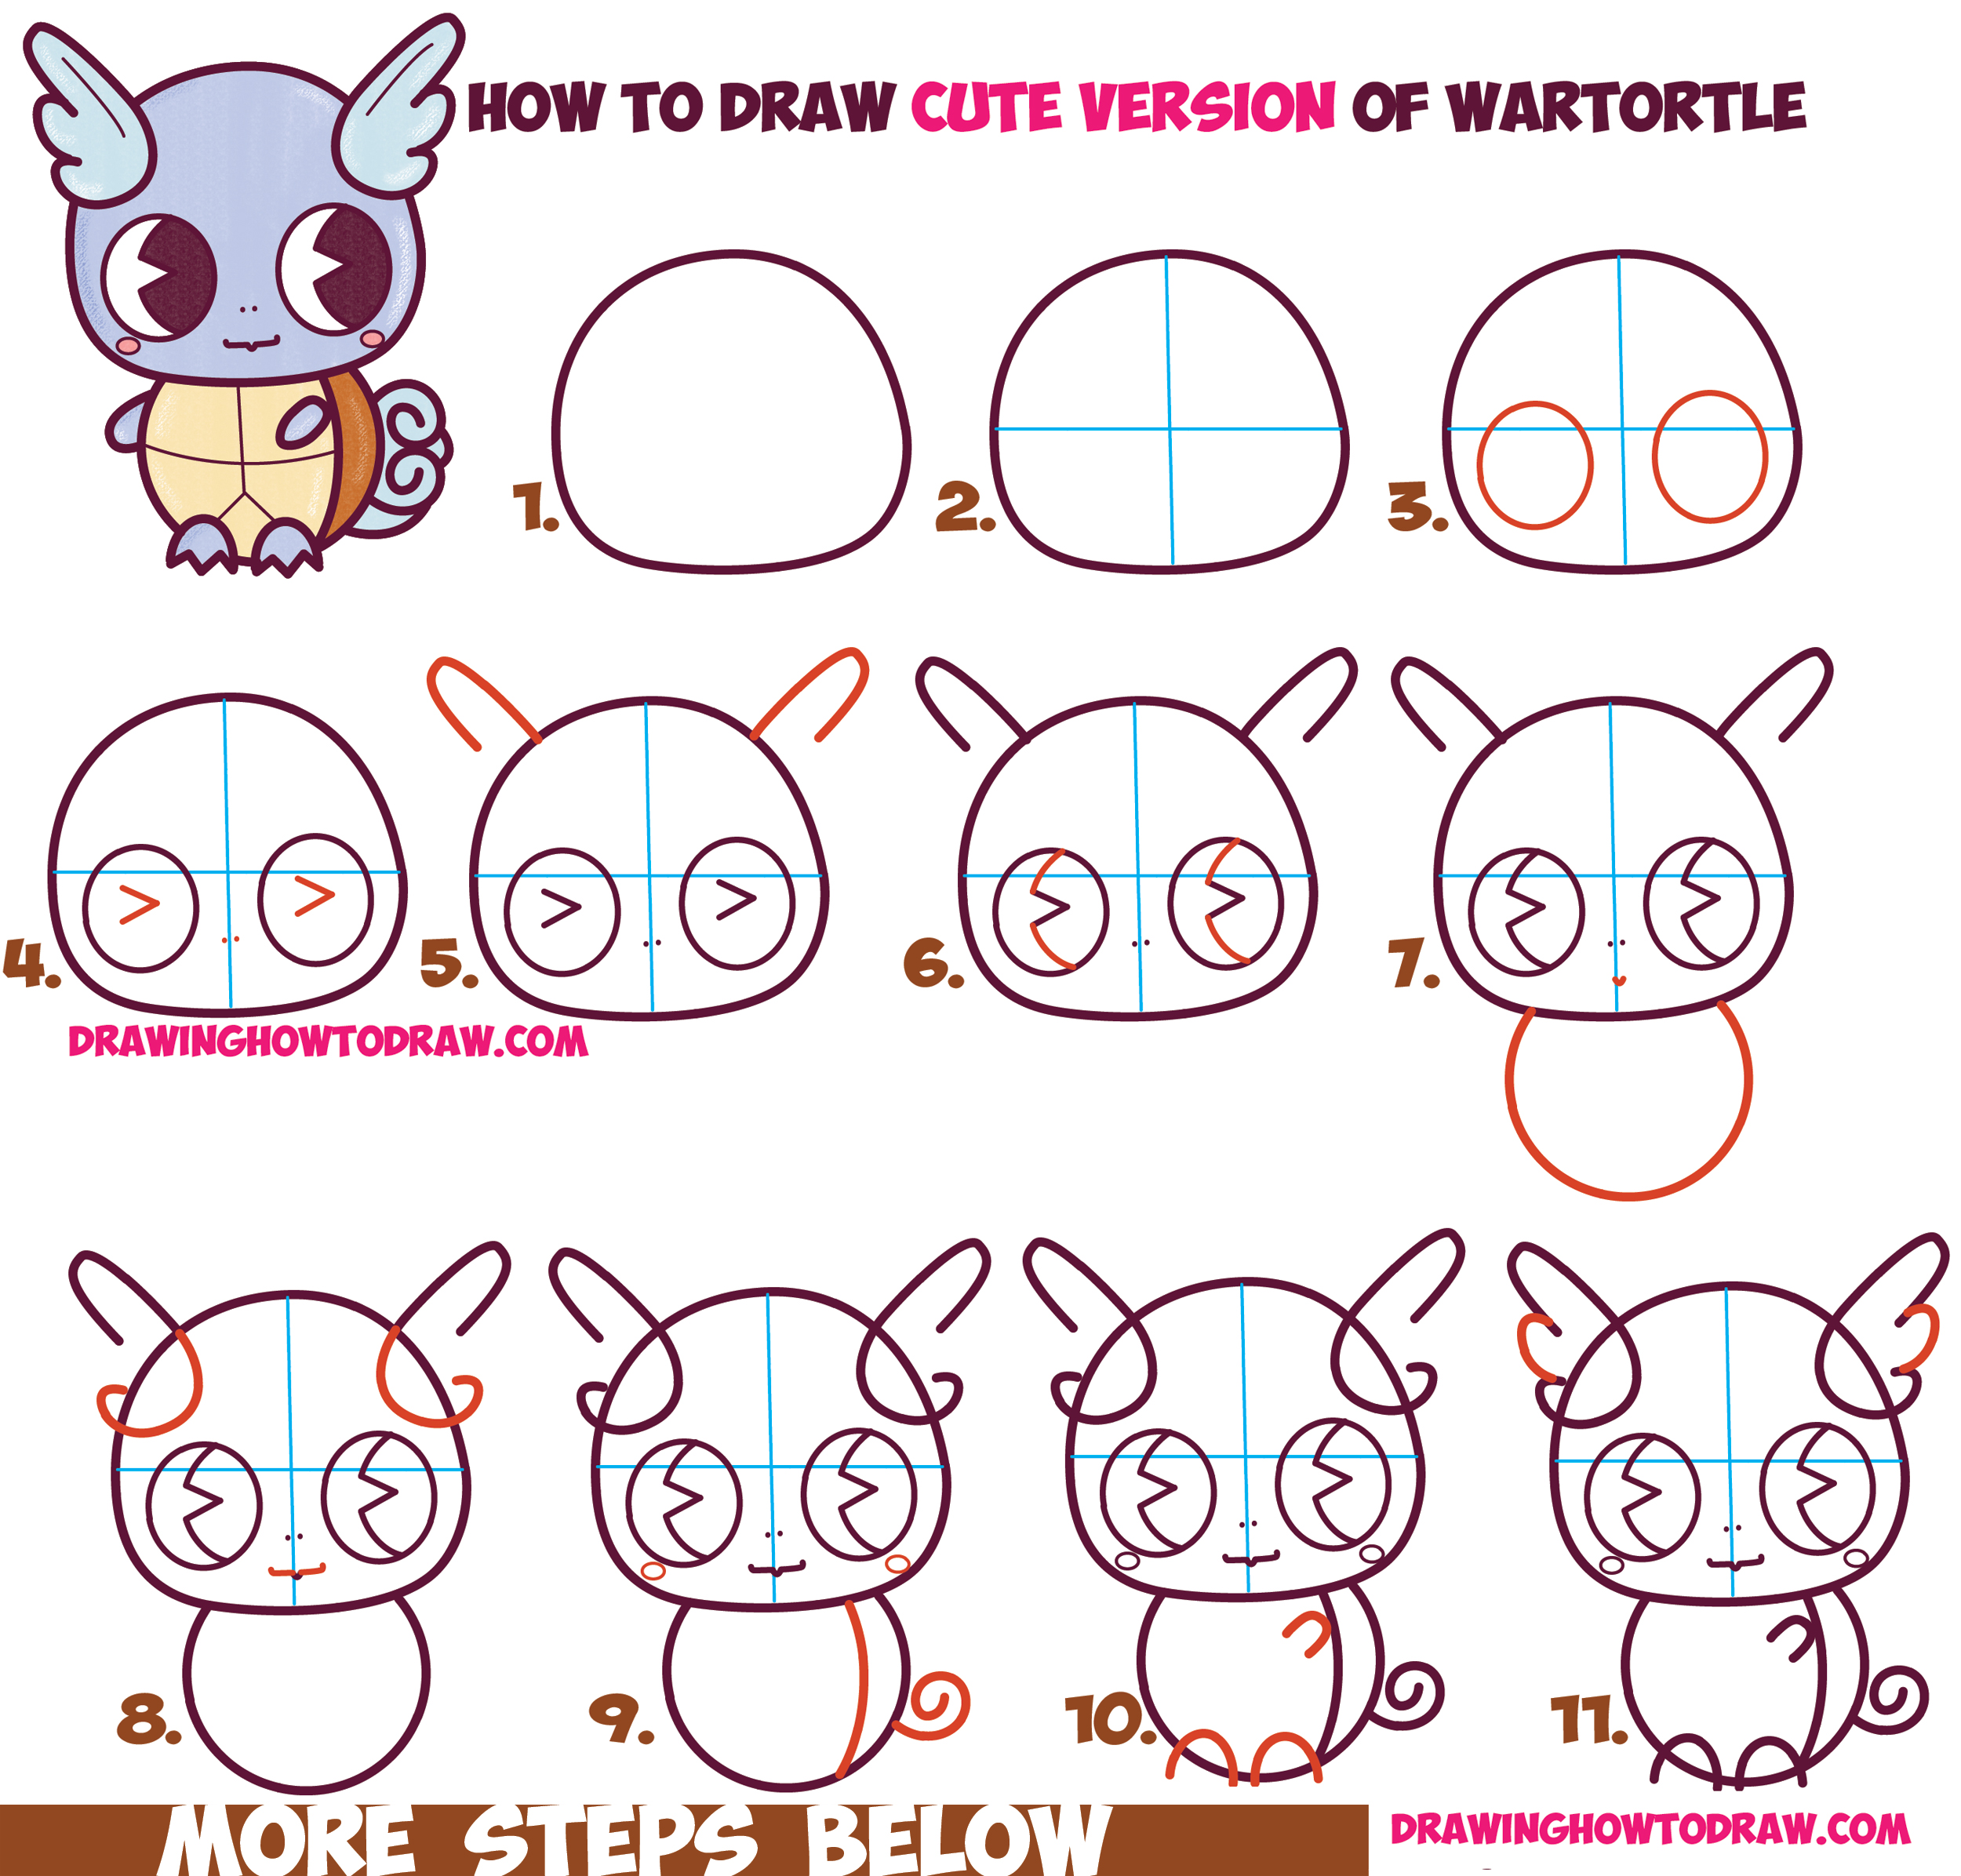 How to Draw Cute / Chibi / Kawaii Wartortle from Pokemon Easy Step by ...